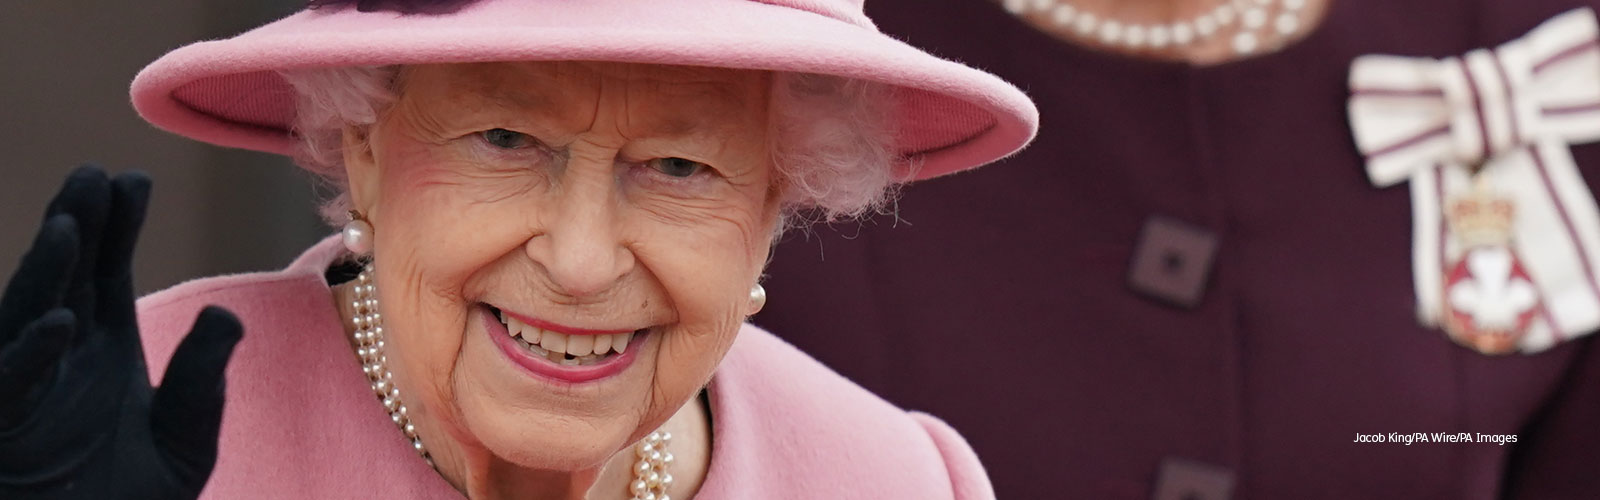 An image of Queen Elizabeth II, dressed in pink, smiling and waving at the camera